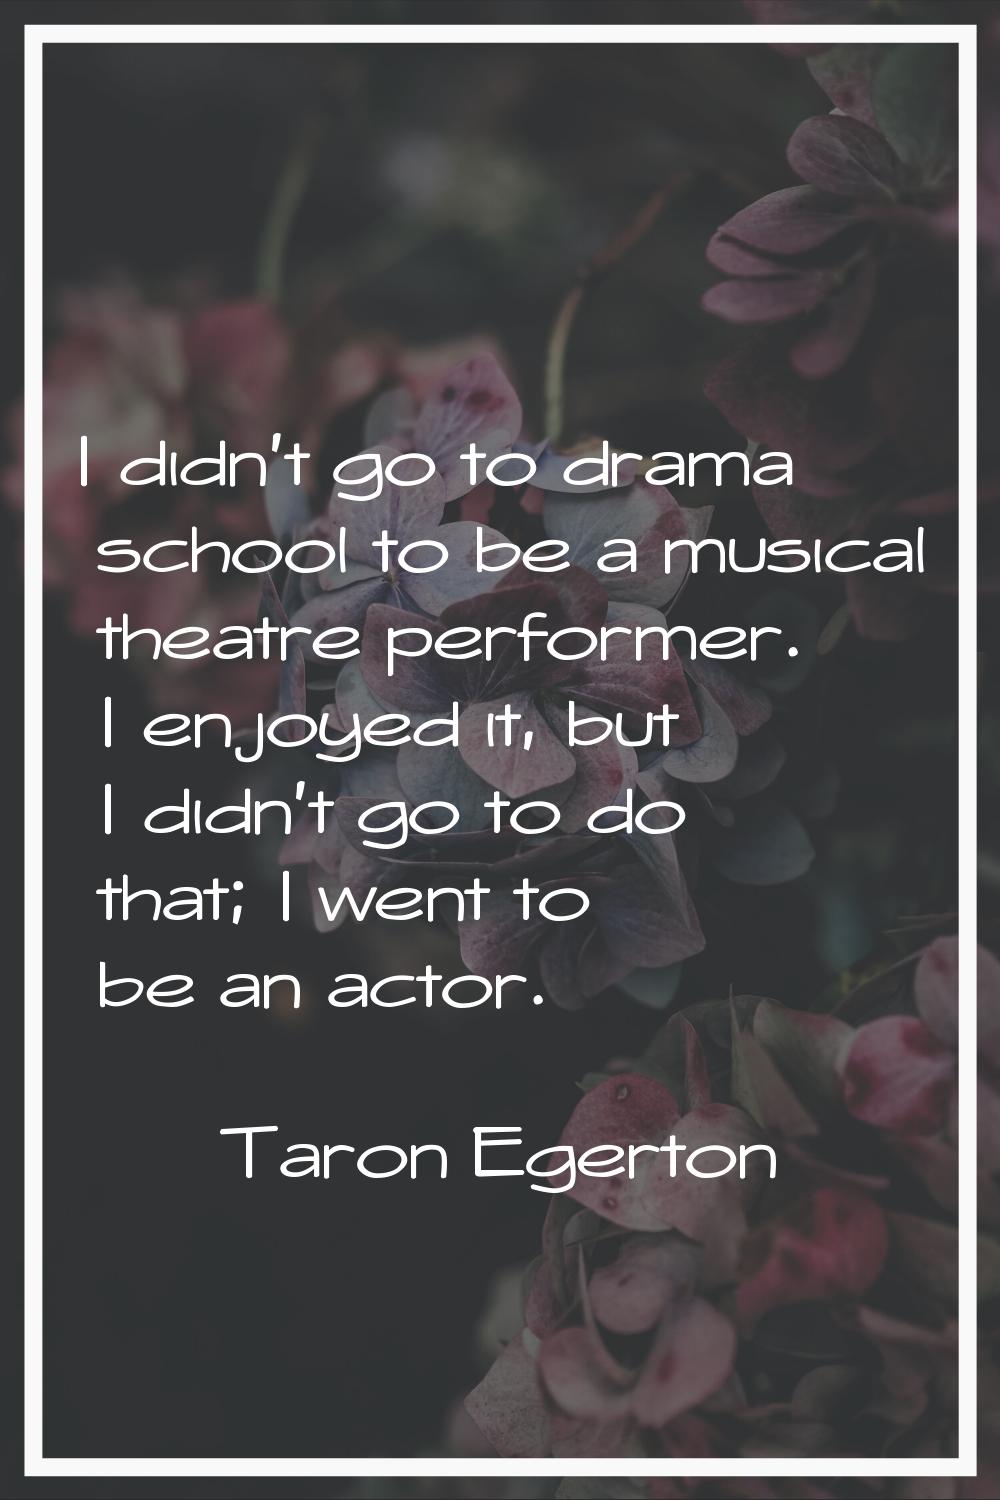 I didn't go to drama school to be a musical theatre performer. I enjoyed it, but I didn't go to do 